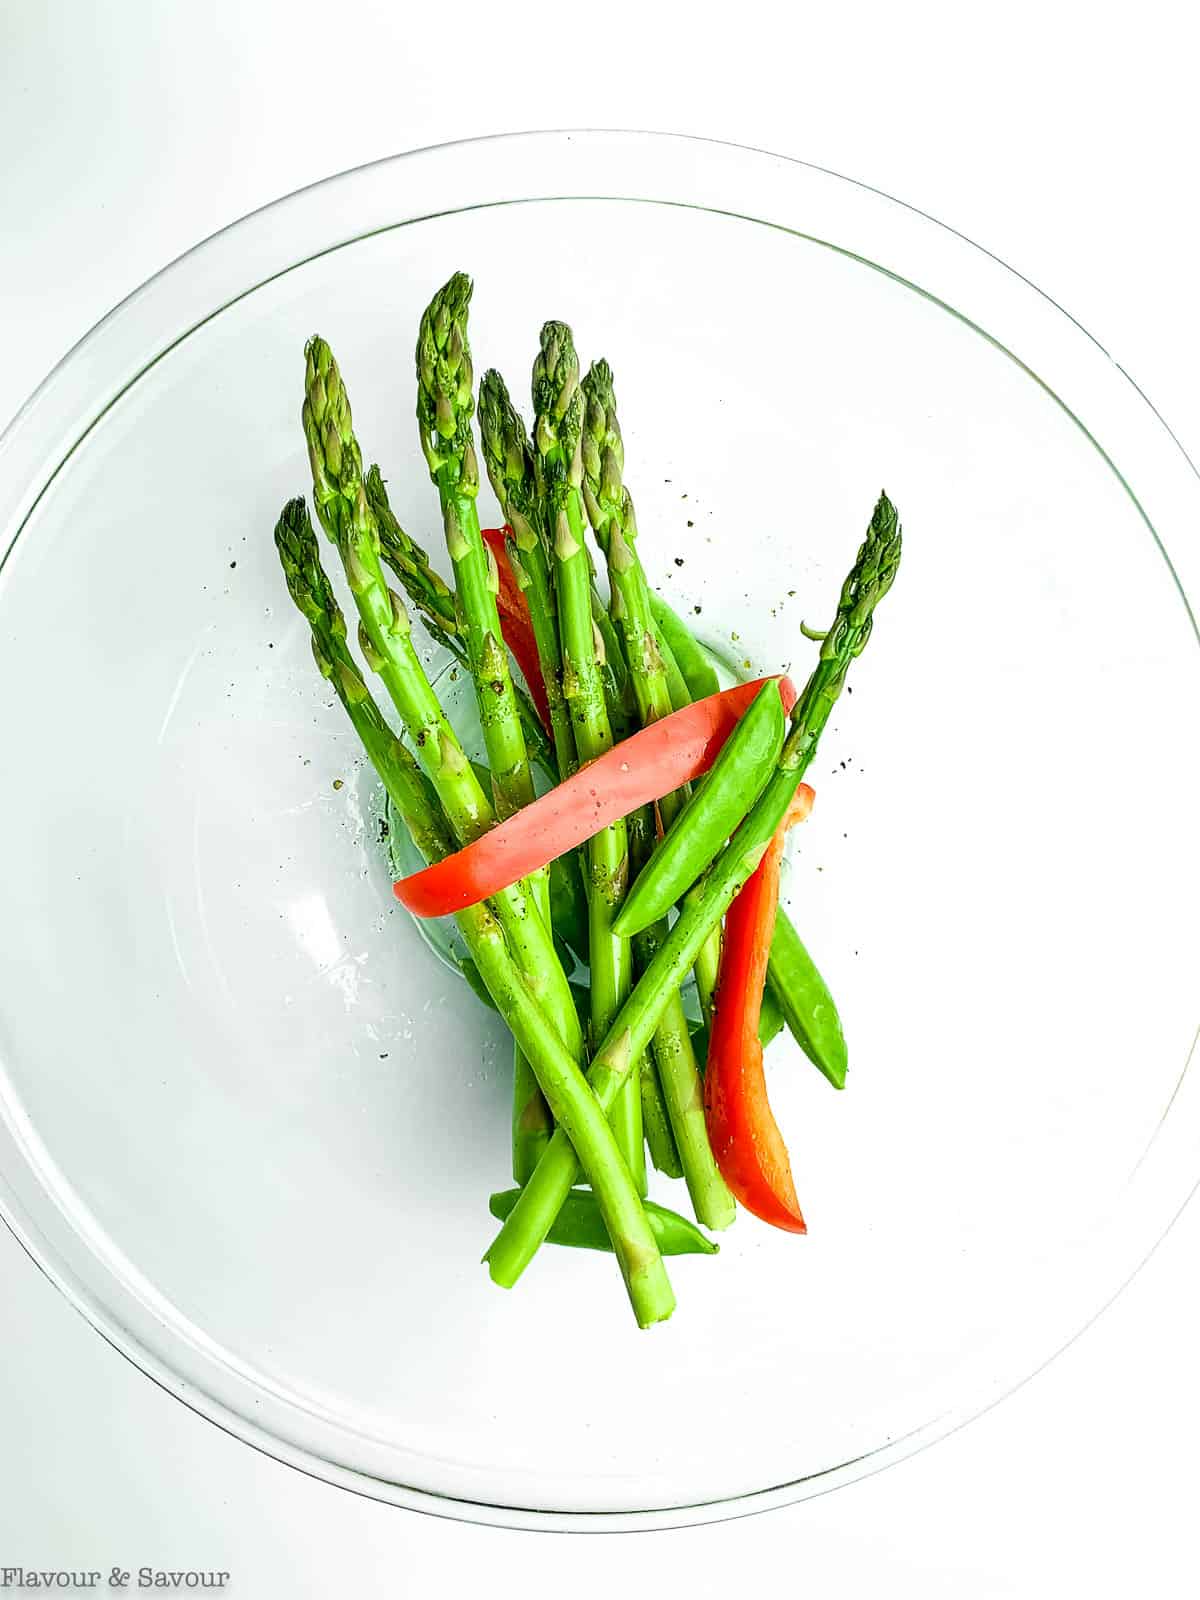 Asparagus, peas and red peppers tossed in oil.